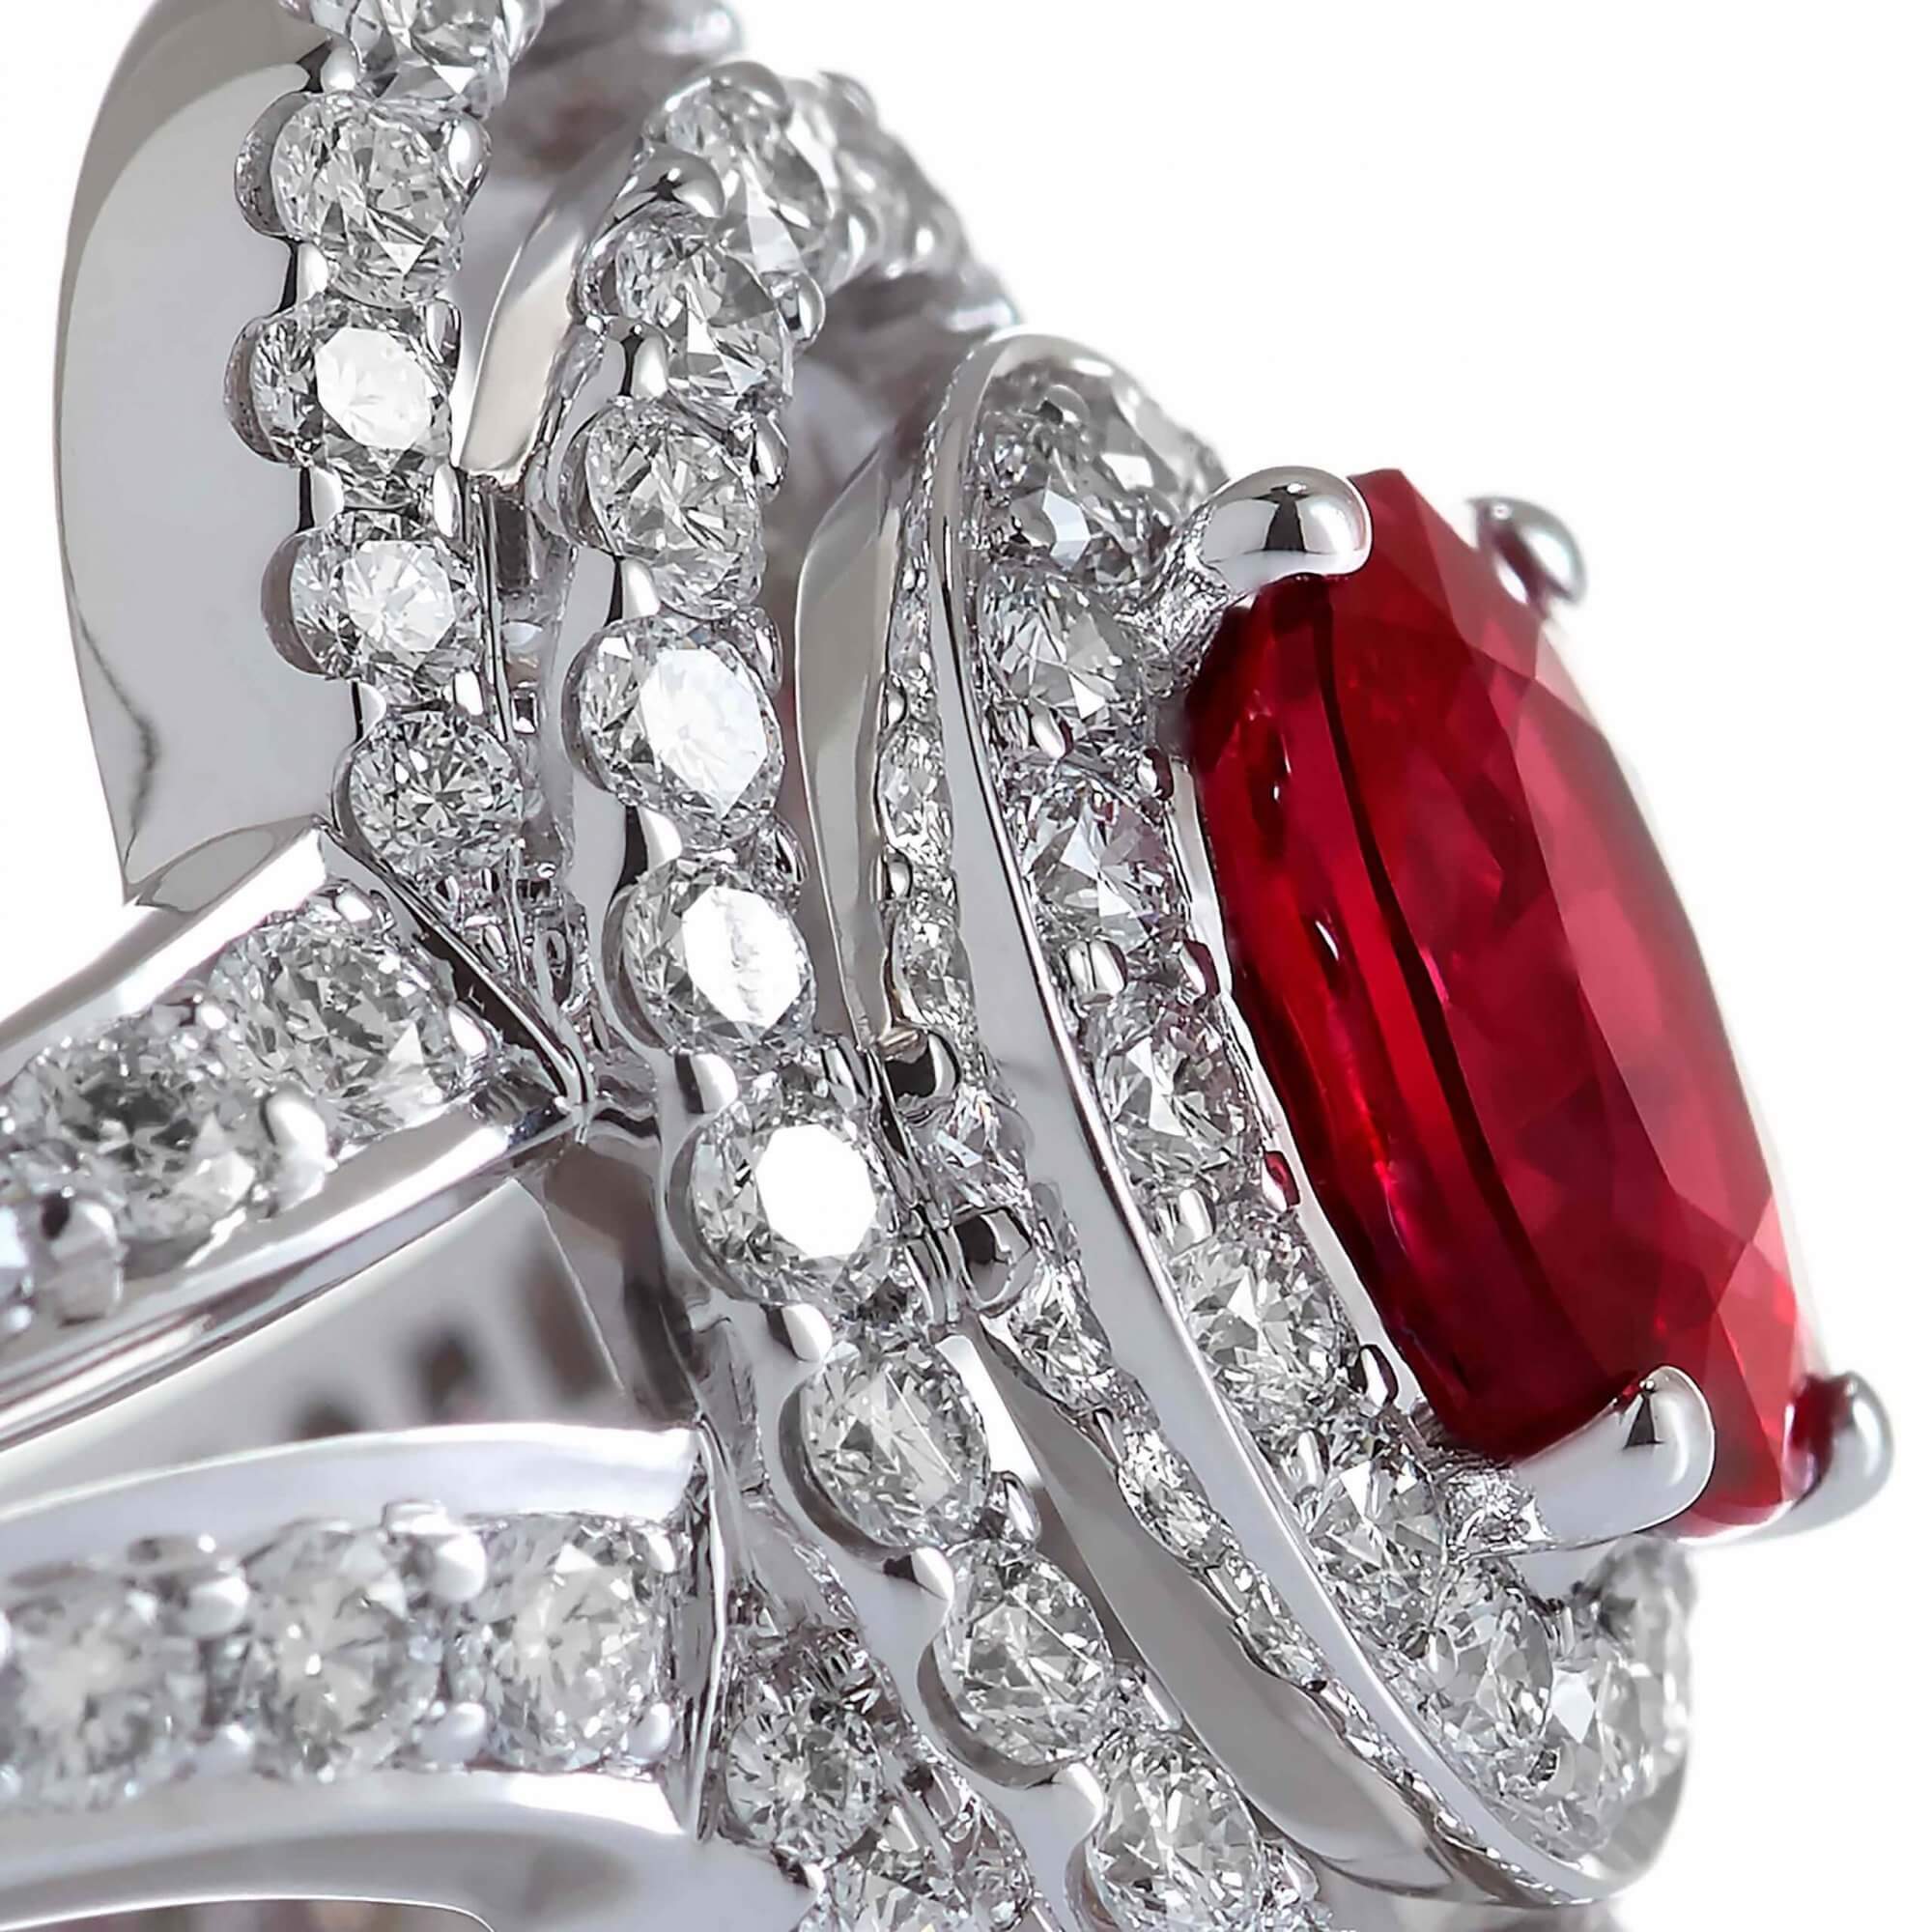 Garrard Jewelled Vault 1.38ct Oval Burmese Pigeons Blood Ruby Ring In 18ct White Gold with Diamonds 2017331 Detail